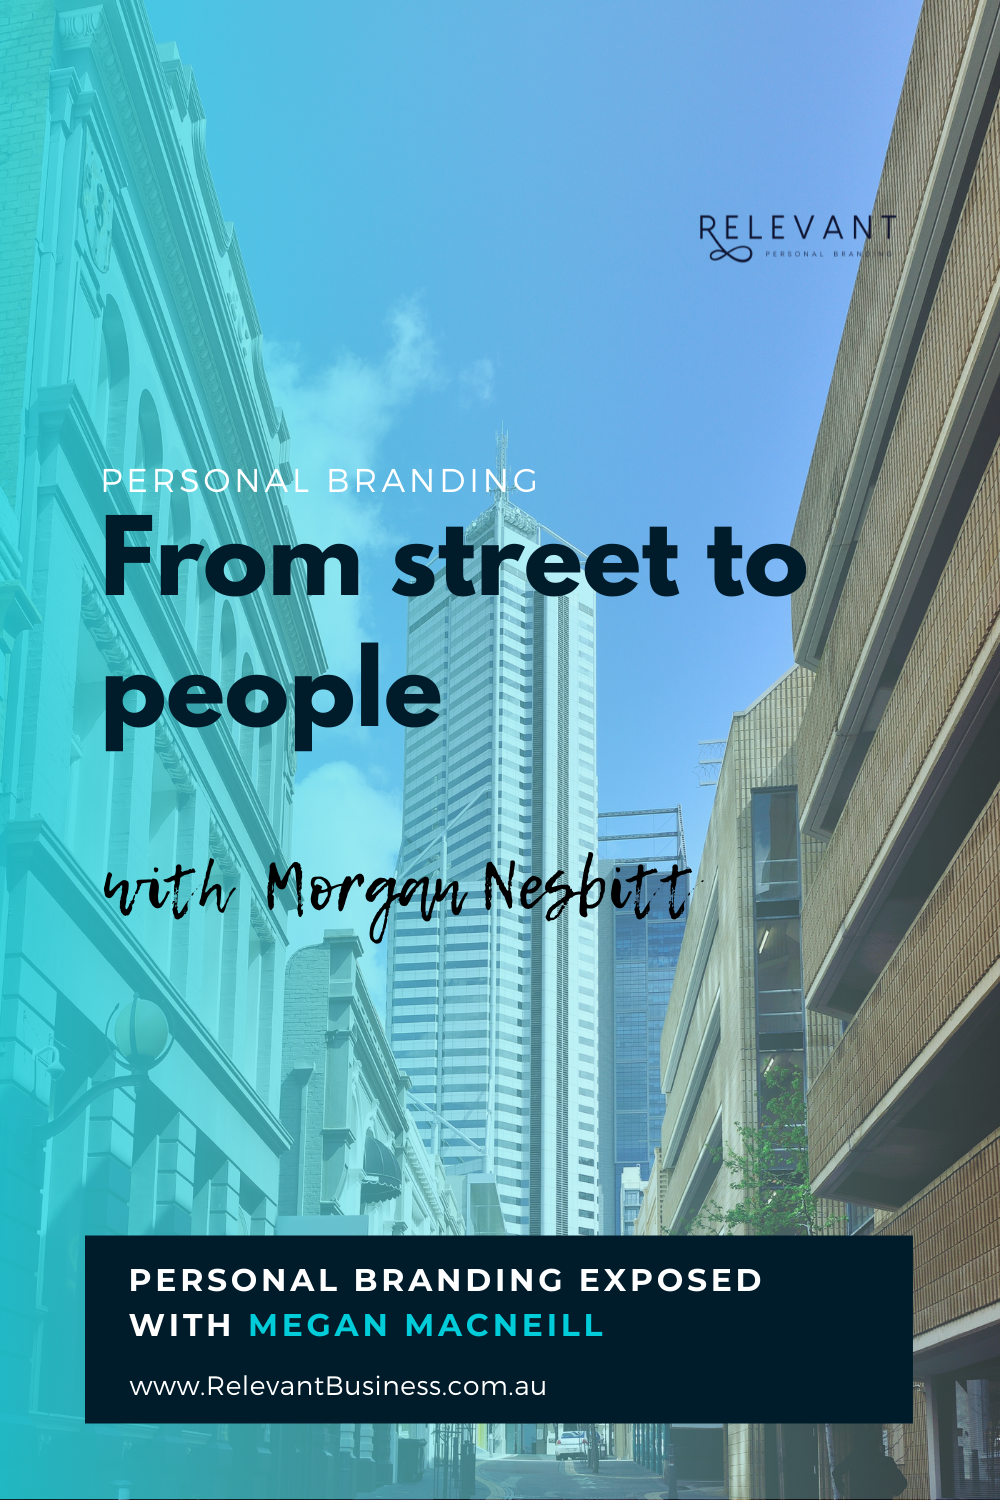 From street to people with Morgan Nesbitt